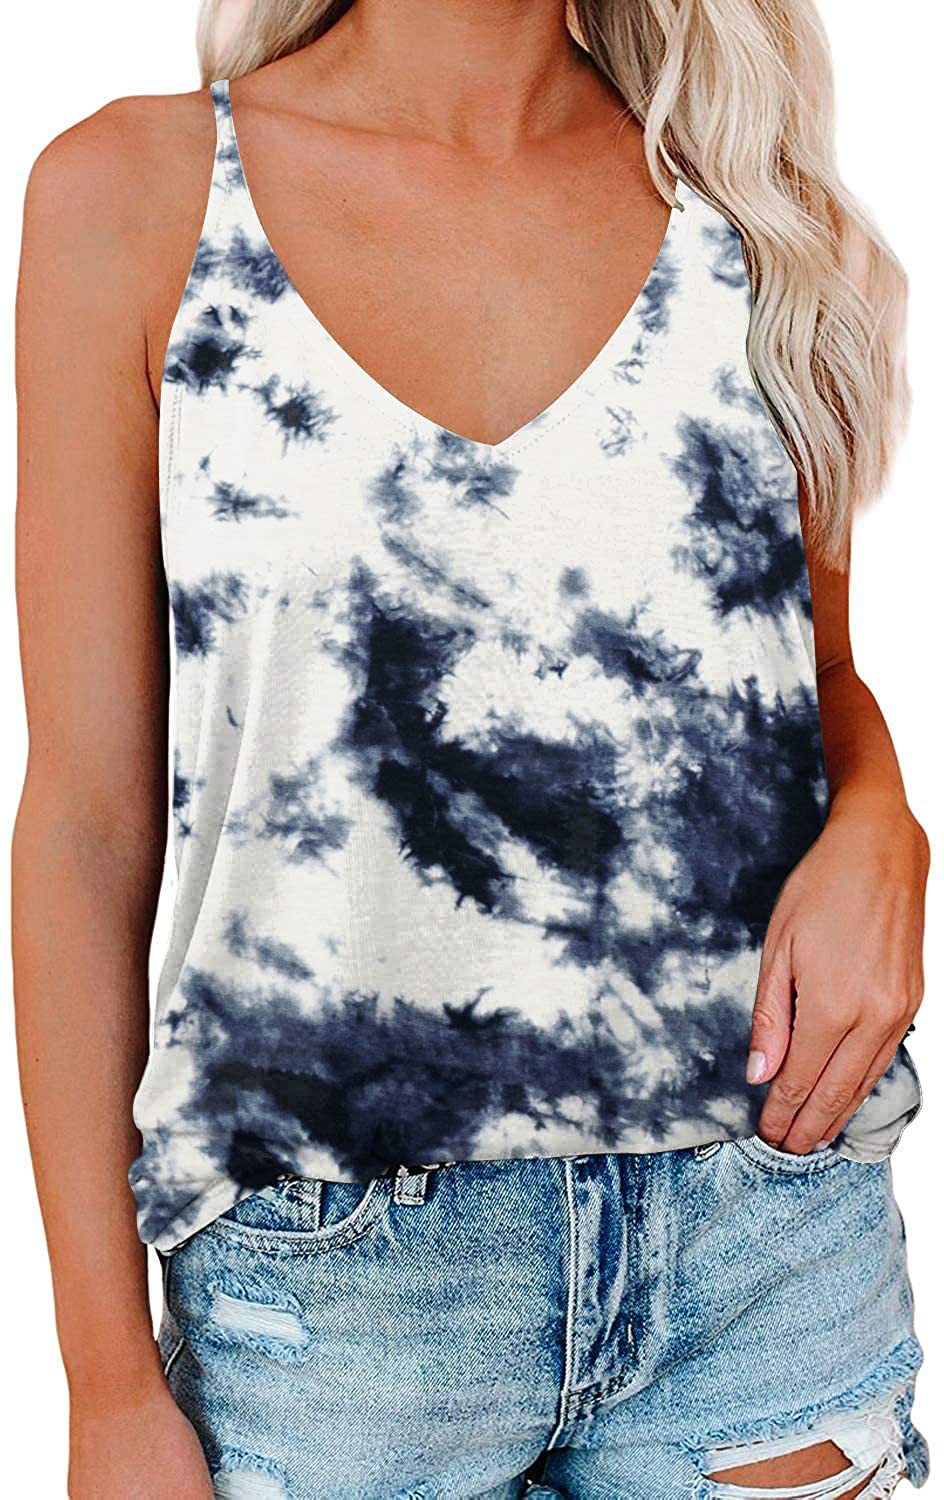 Women's Summer Loose Printed Strap Type Sexy Plus Size